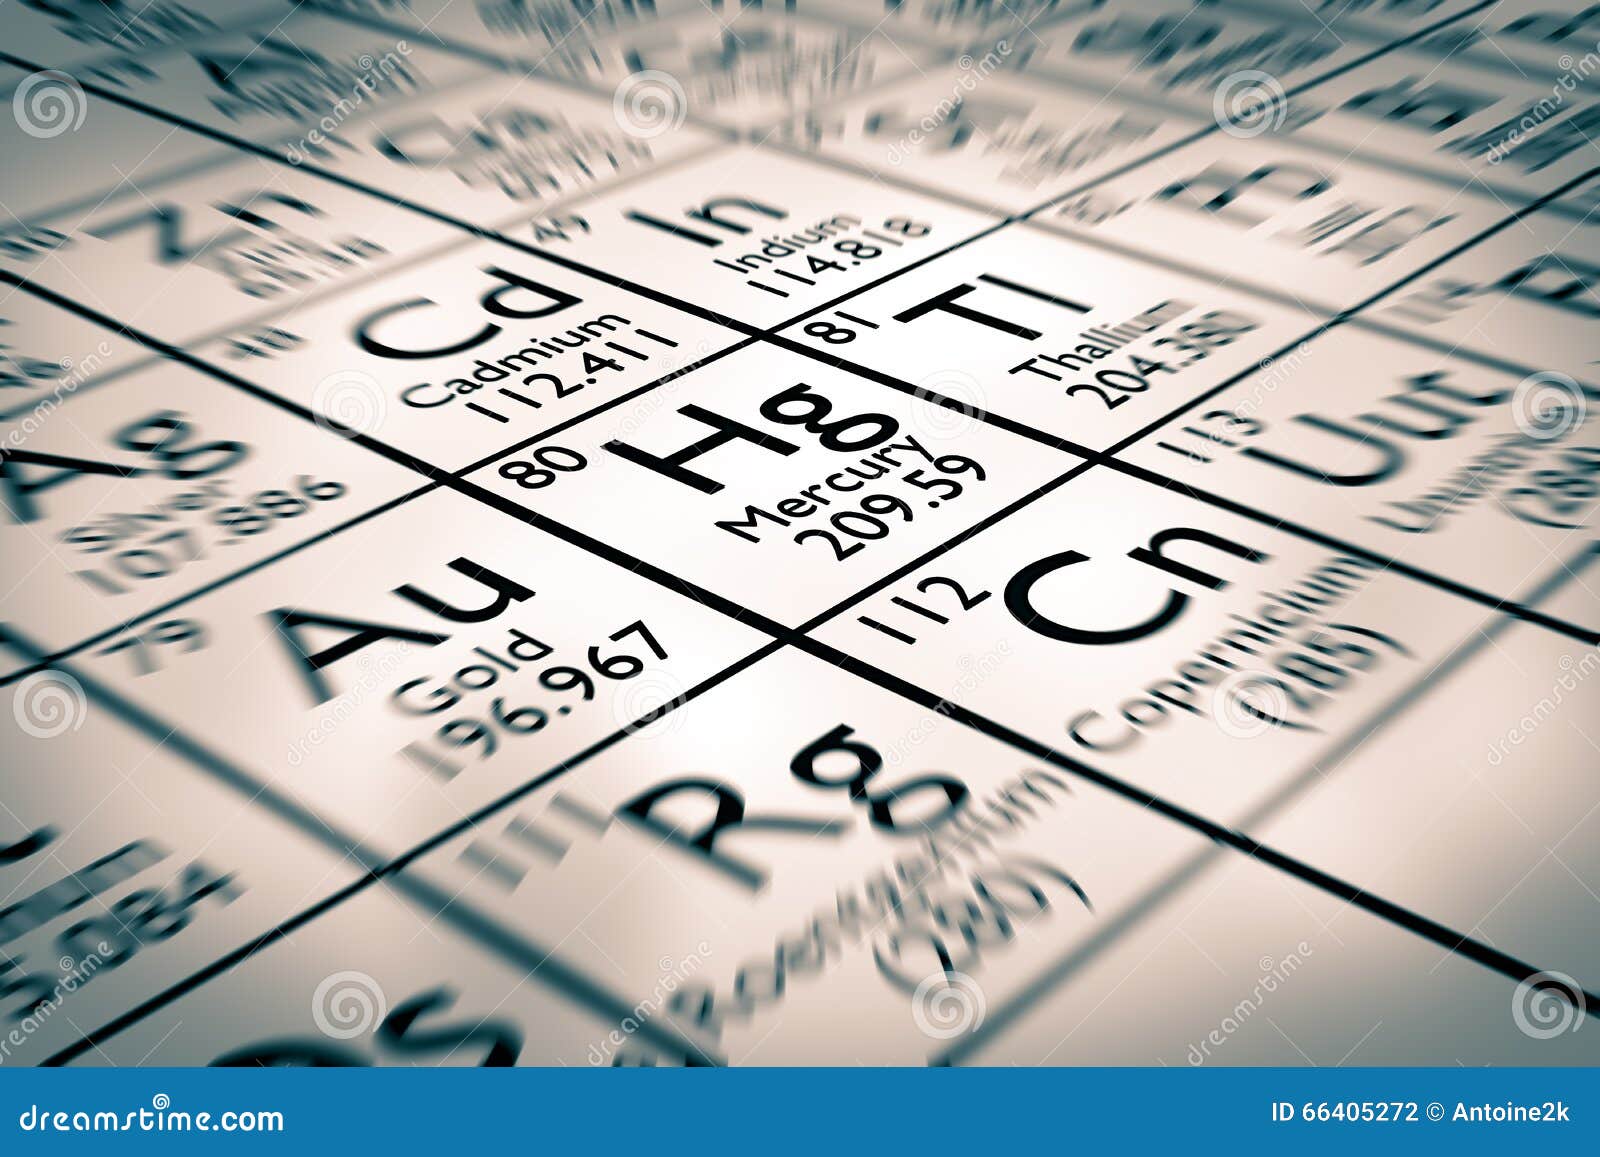 periodic table wallpaper 1440x900 +radioactive elements co… | Flickr